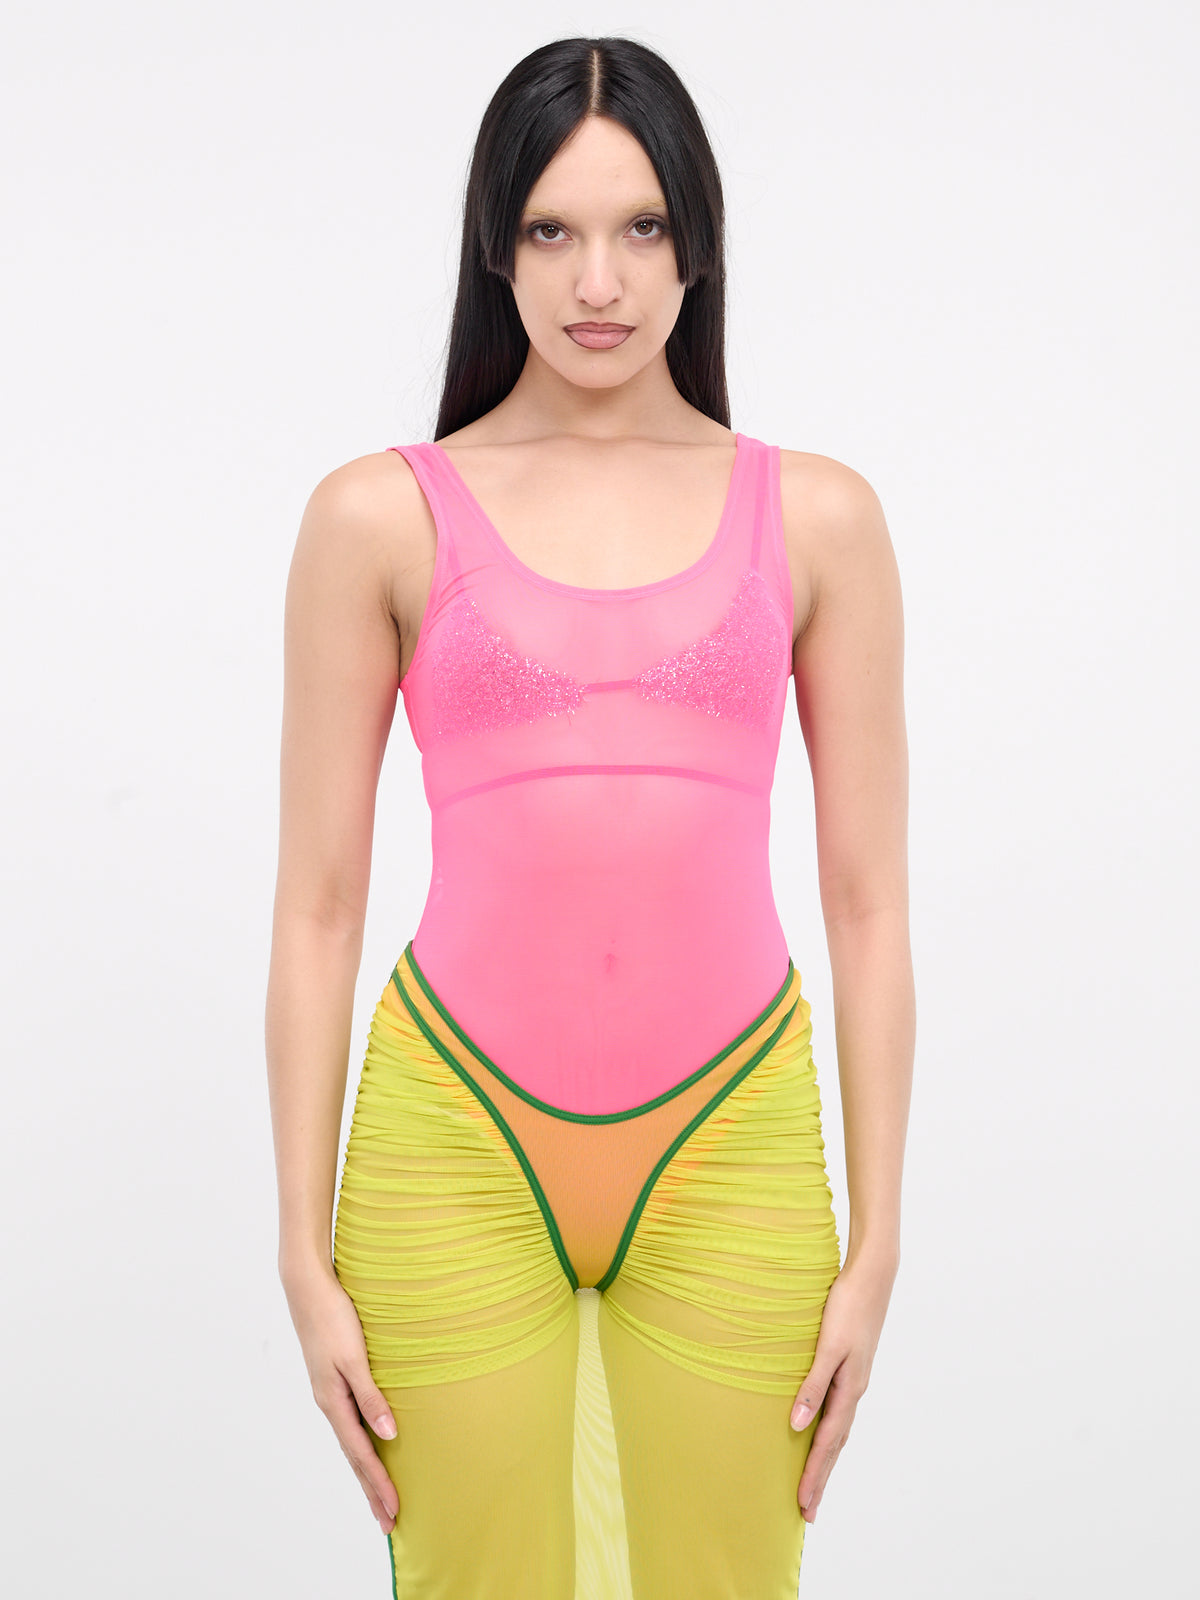 Ufby-Yoma Bodysuit (A10752-UFBY-YOMA-UW-PINK)